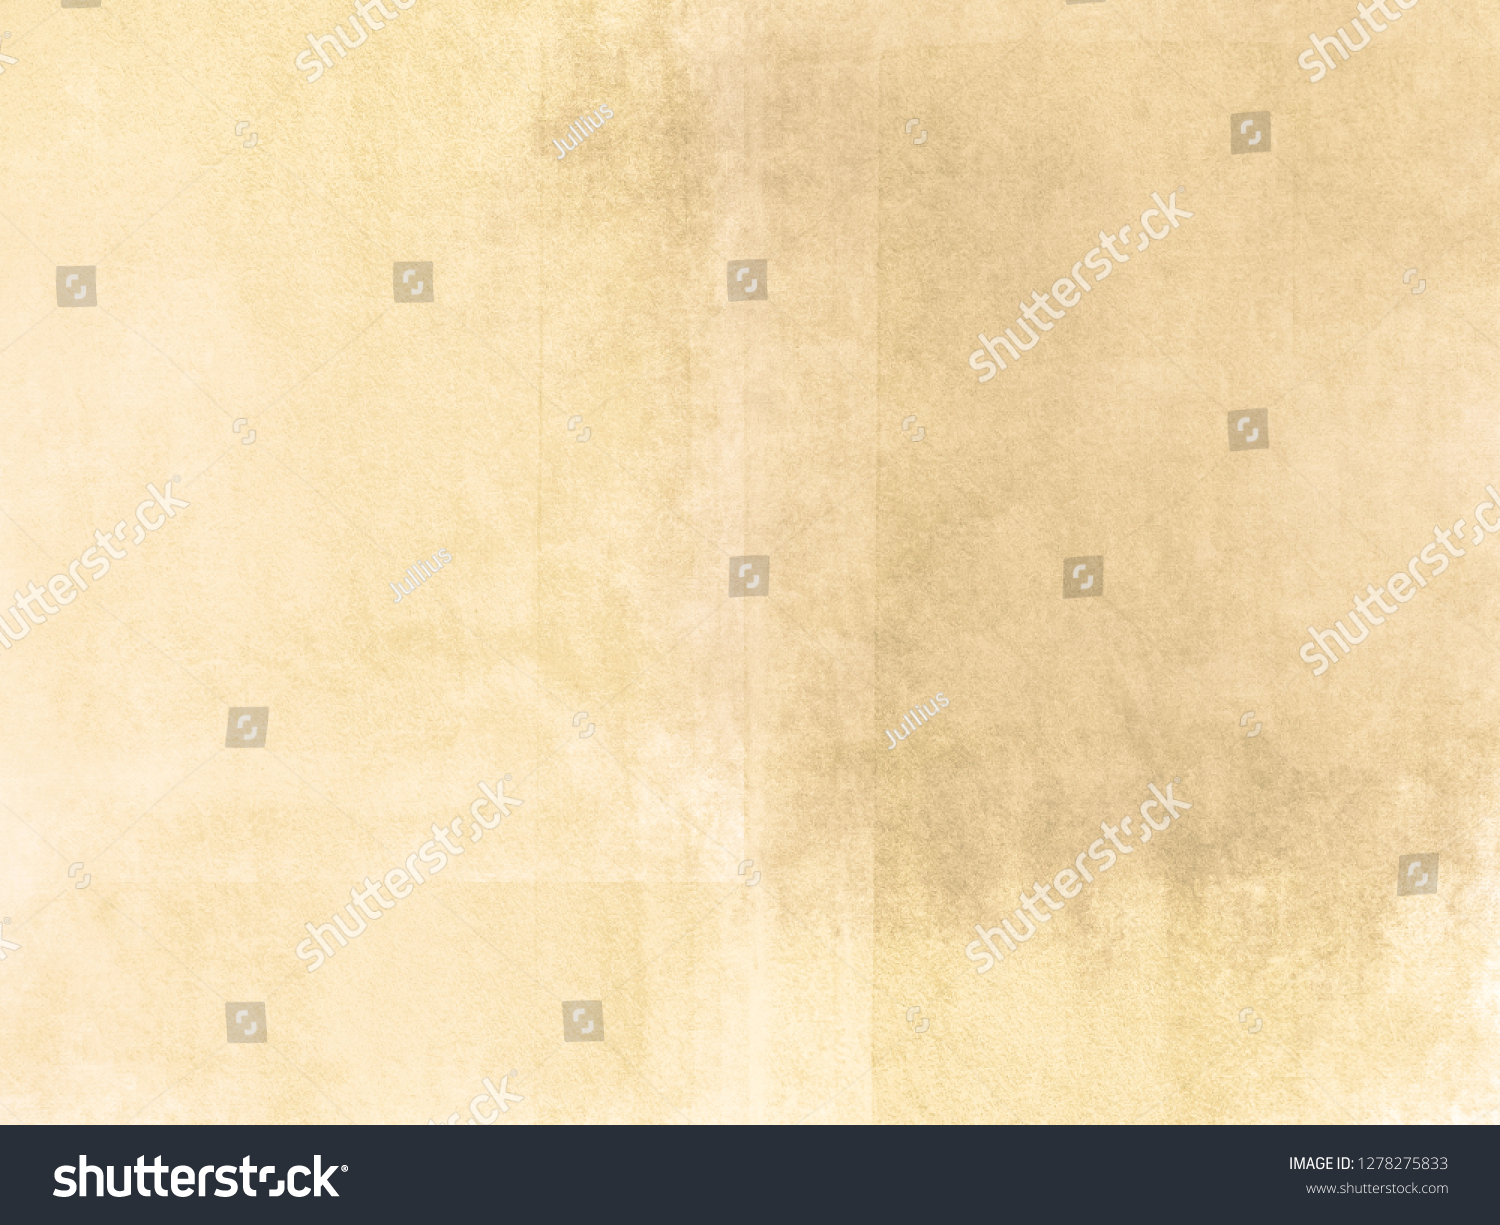 Old crumpled dirty paper texture background #1278275833